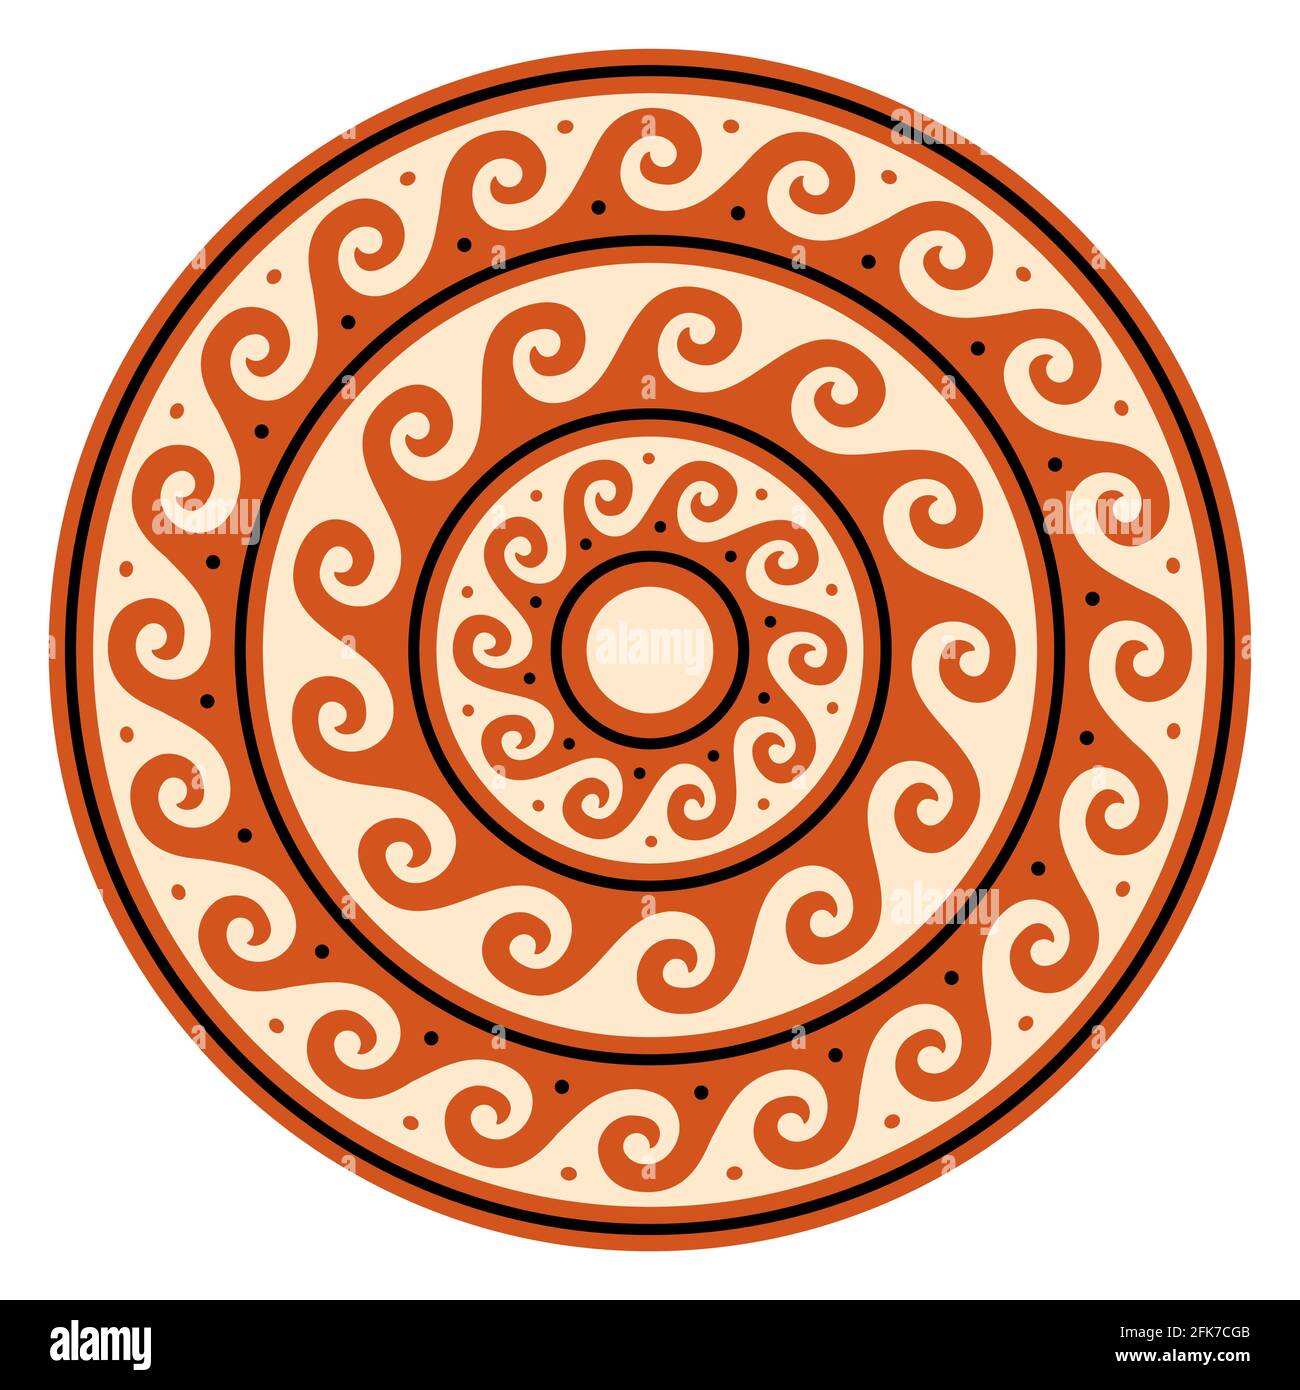 Greek wave vector mandala, ancient round meander art in circle, orange design isolated on white Stock Vector